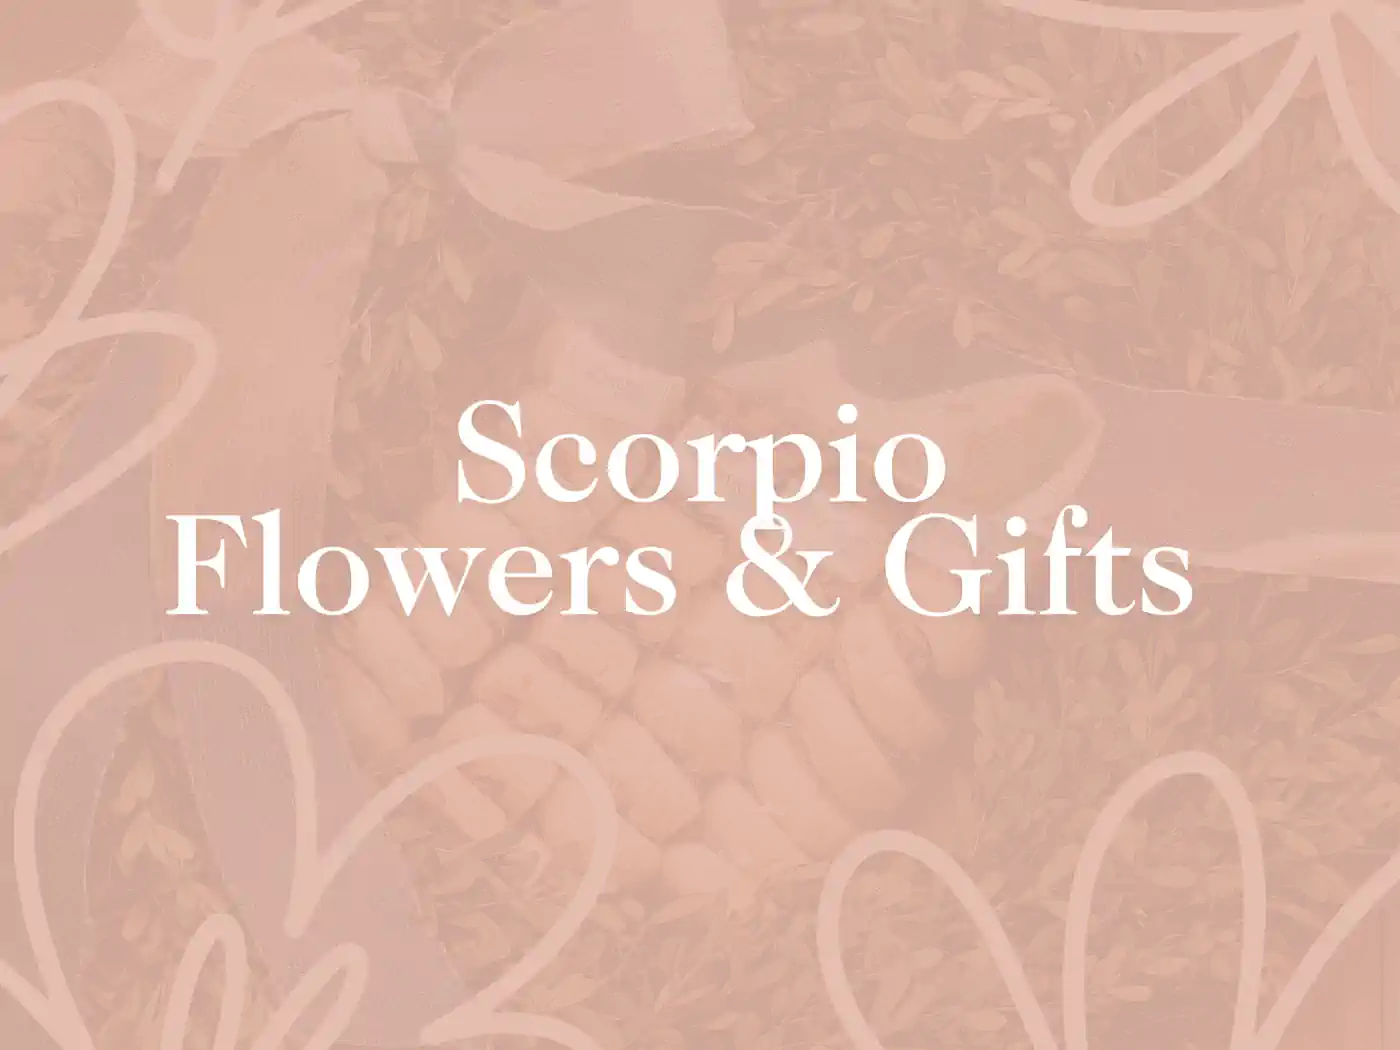 A decorative sign with the text "Scorpio Flowers & Gifts" in a floral background. Fabulous Flowers and Gifts.